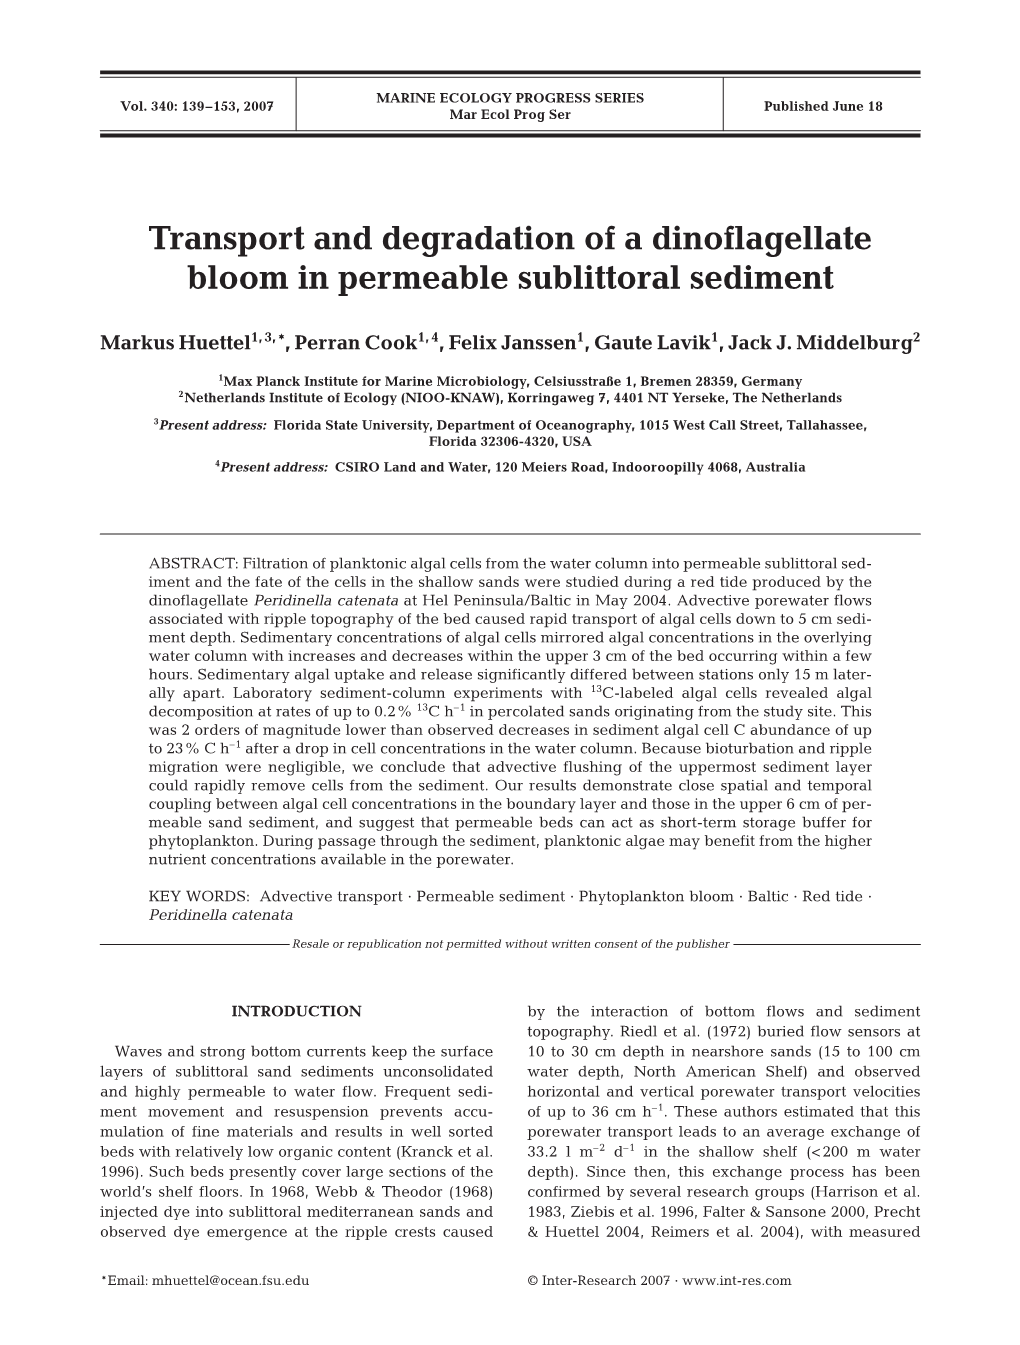 Transport and Degradation of a Dinoflagellate Bloom in Permeable Sublittoral Sediment